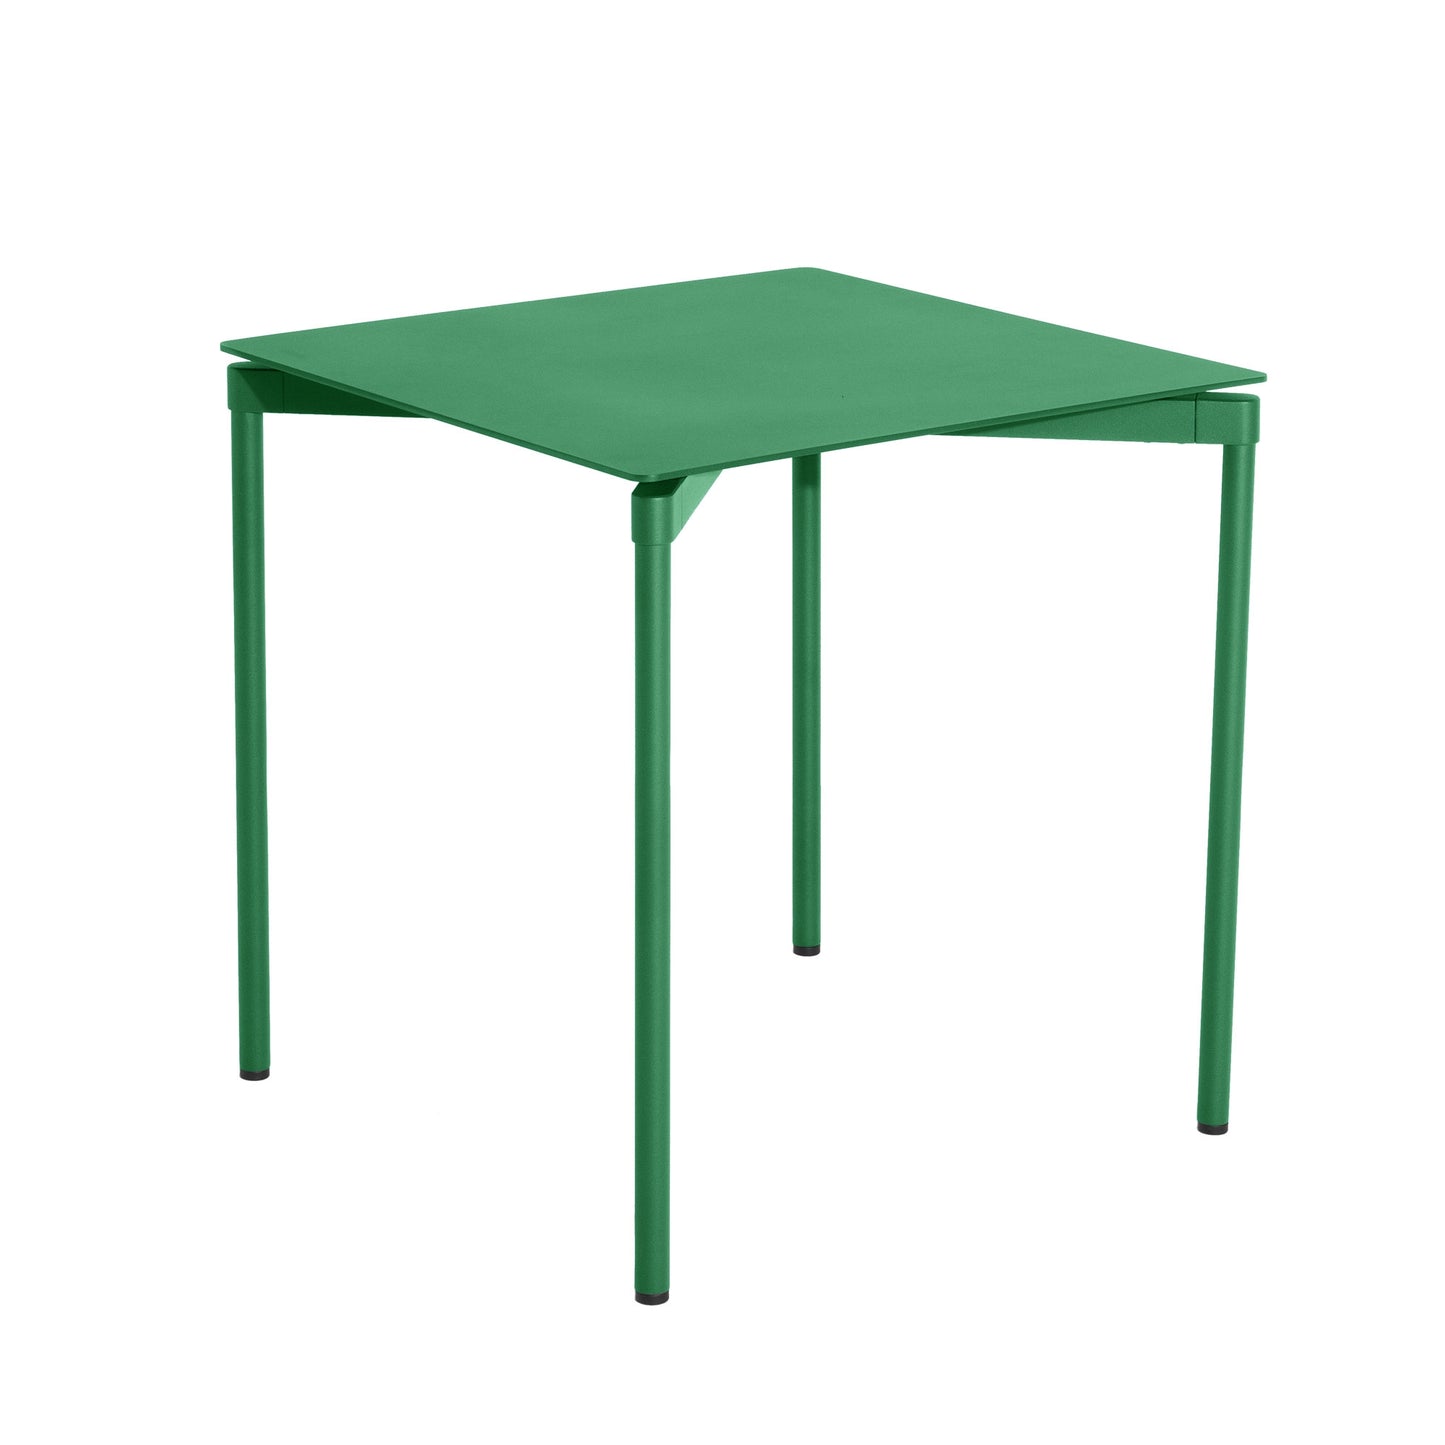 FROMME Table by Petite Friture #Mint Green